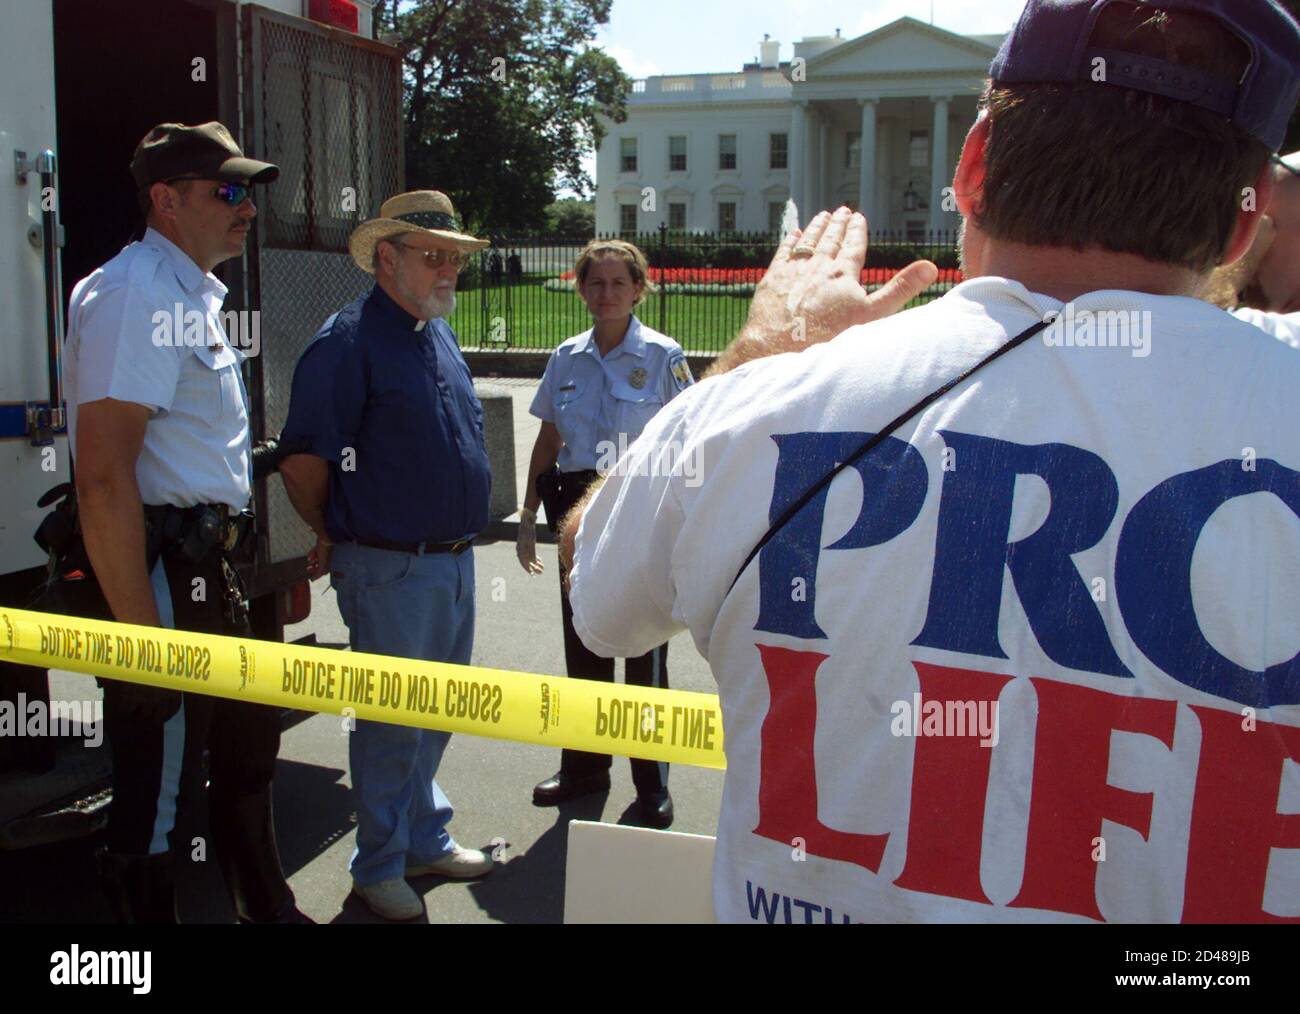 An anti-abortion protester (2L) waits to be loaded into a paddy wagon after demonstrating against stem cell research in front of the White House in Washington, September 8, 2001. About 20 protesters were arrested. REUTERS/William Philpott  WP/ME Stock Photo